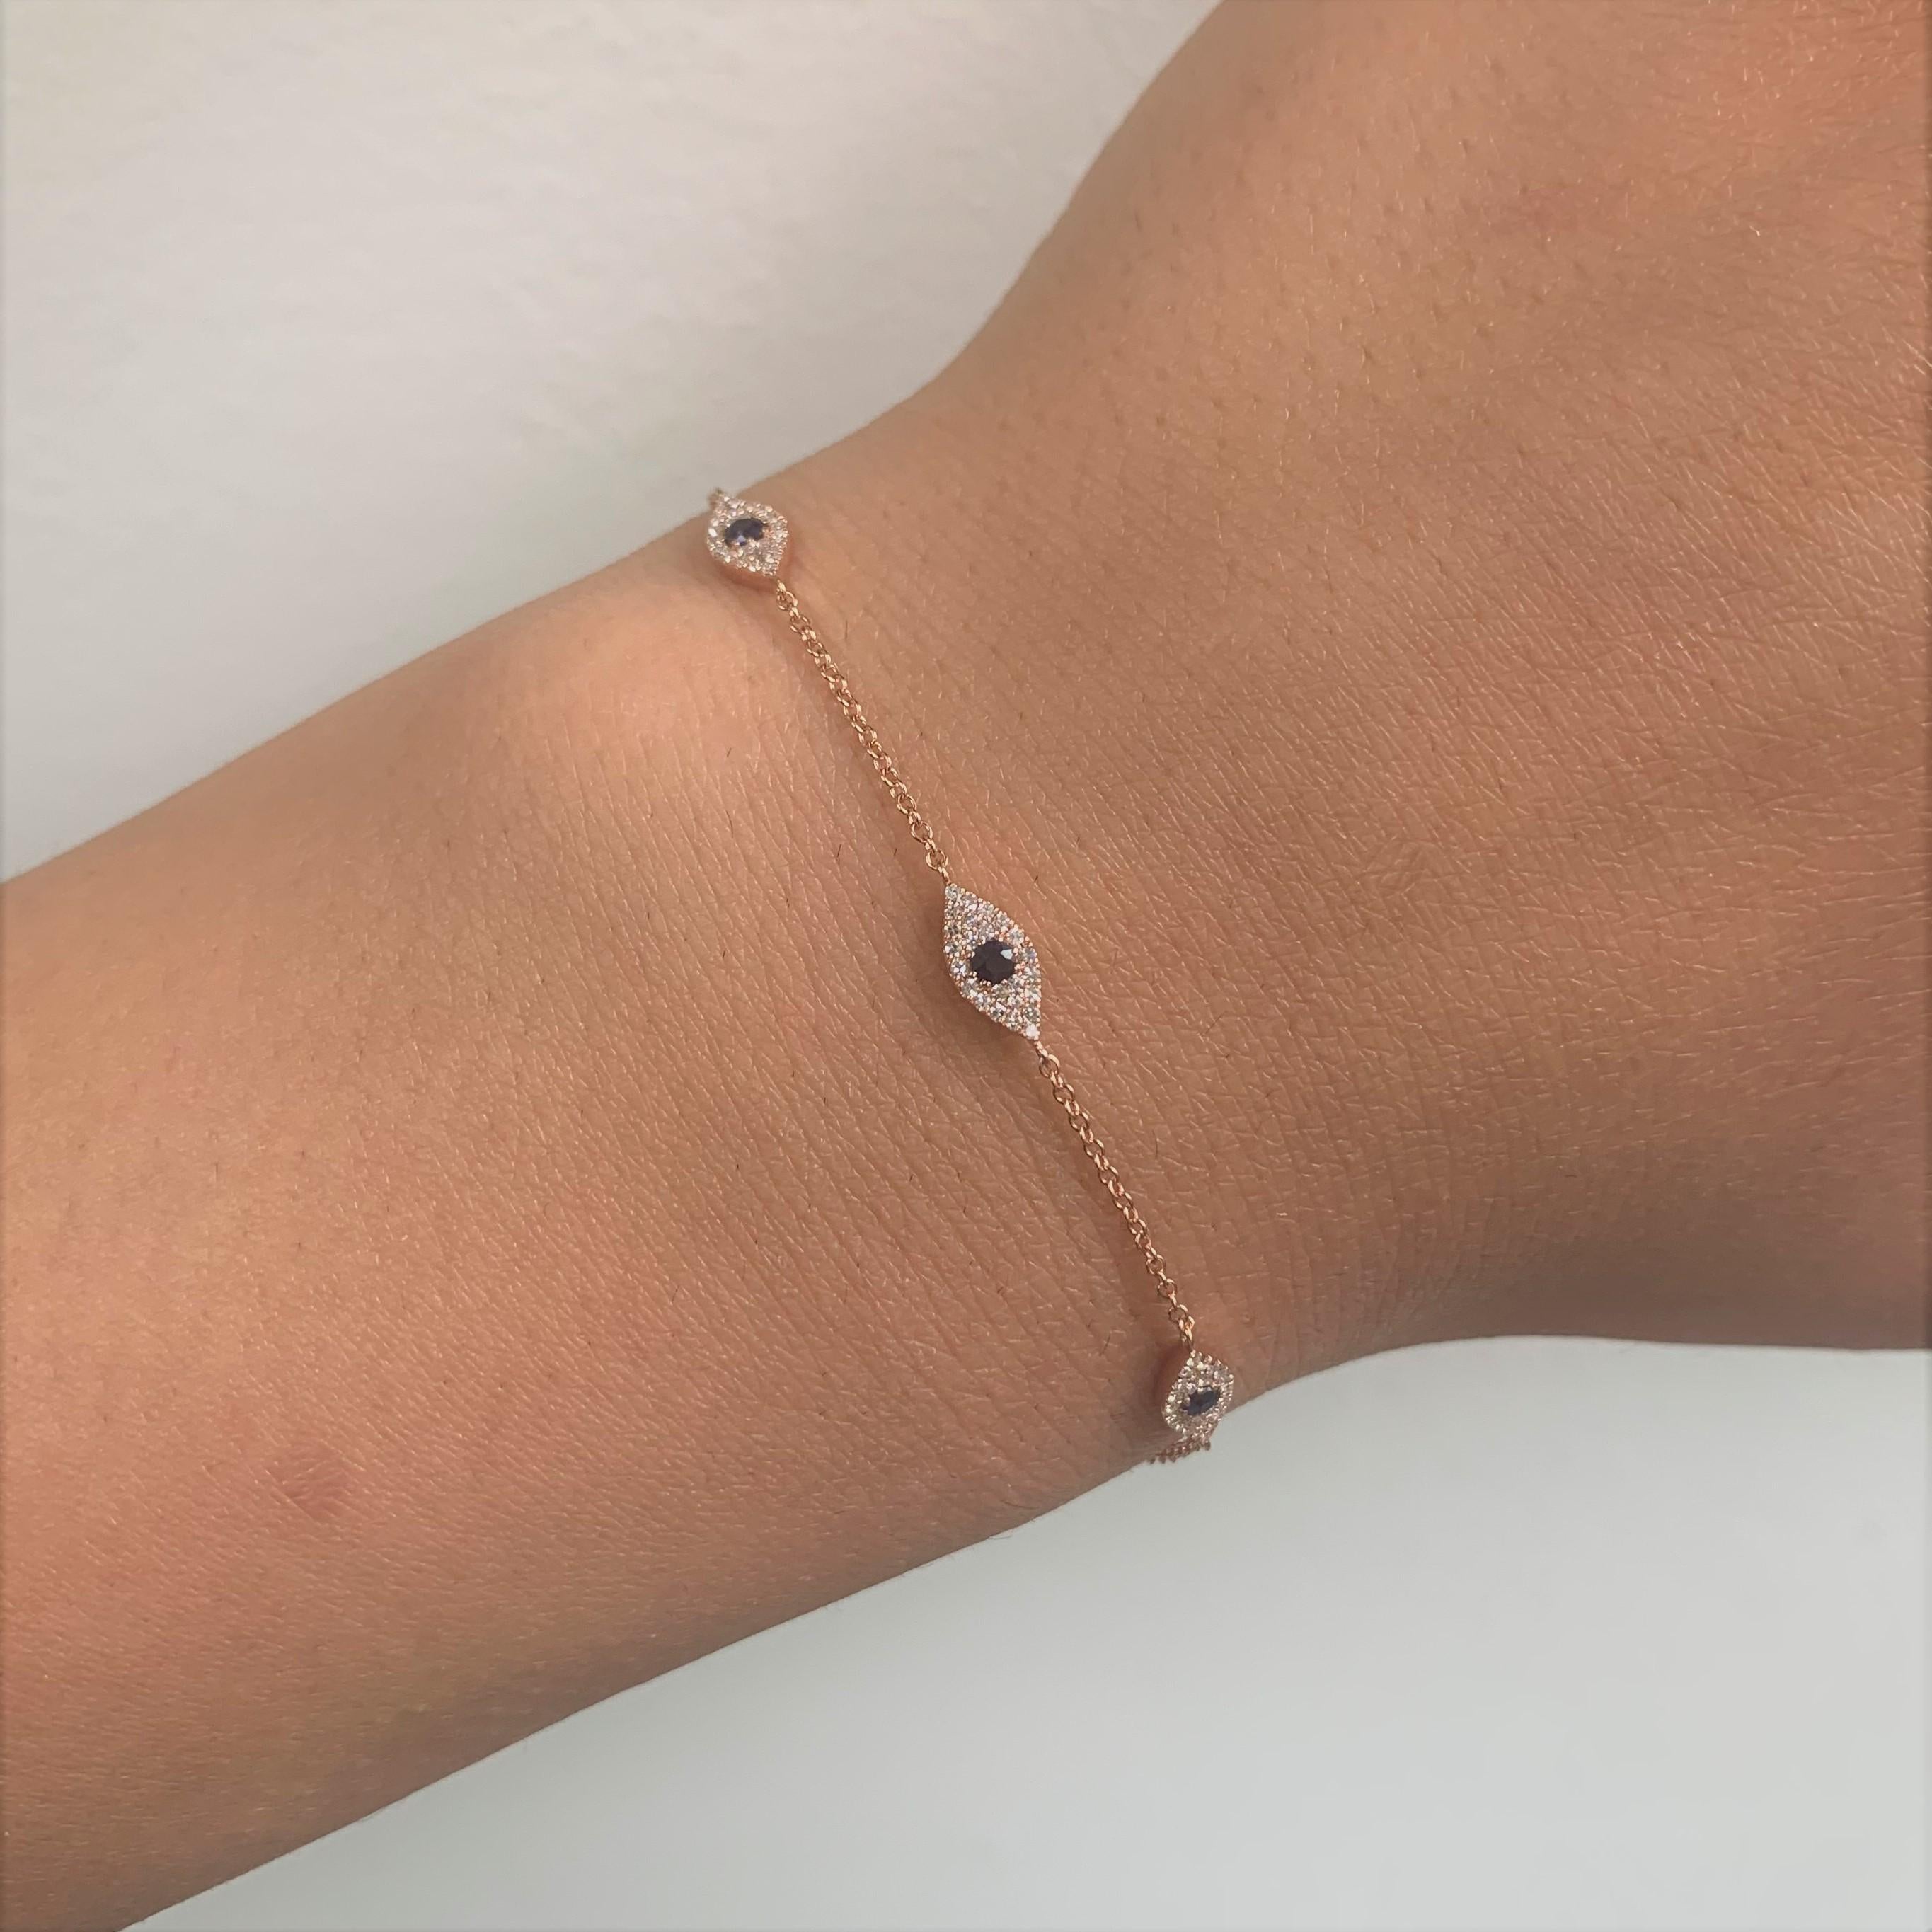 Add this station Evil Eye bracelet to your look! Crafted of 14k Gold and 0.26 ct of Round Sparkly natural Diamonds and 0.27 ct of shiny blue sapphires. Diamond Color and Clarity GH-SI1-SI2.  Bracelet is adjustable up to 7